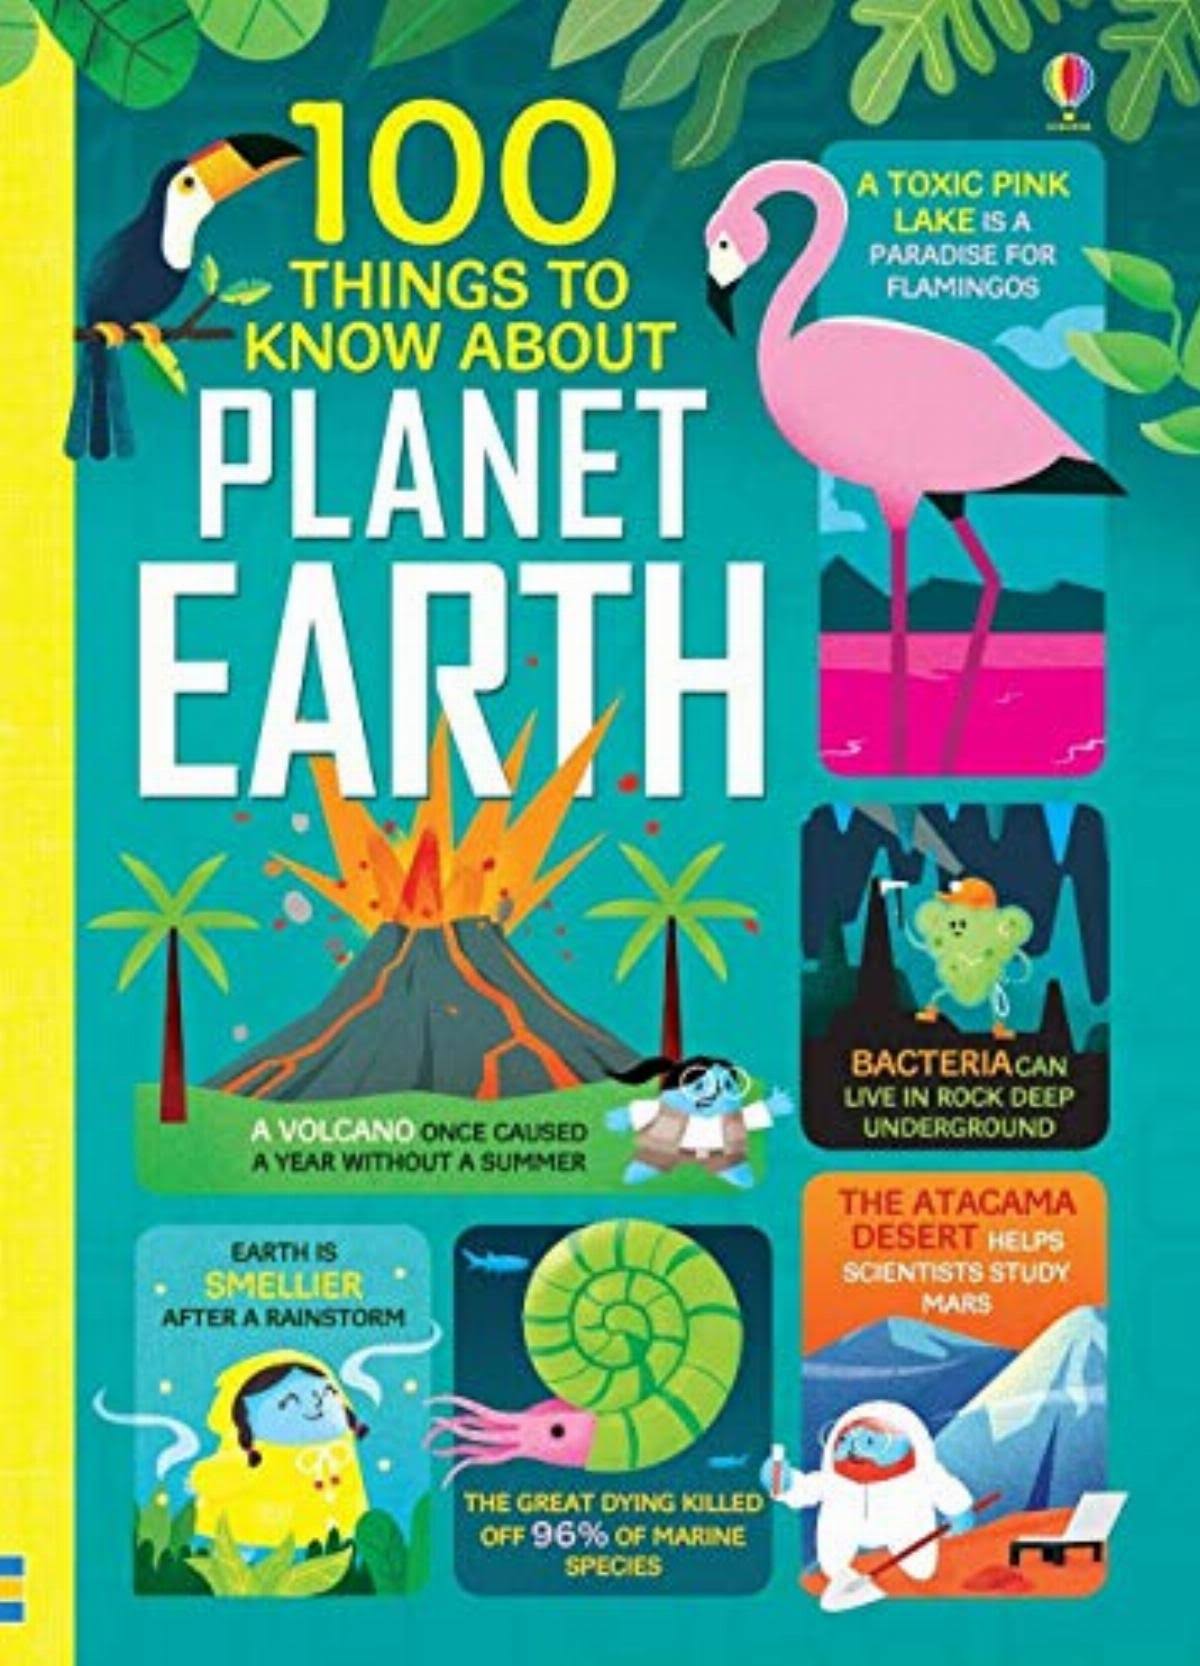 100 Things to Know About Planet Earth - Federico Mariani